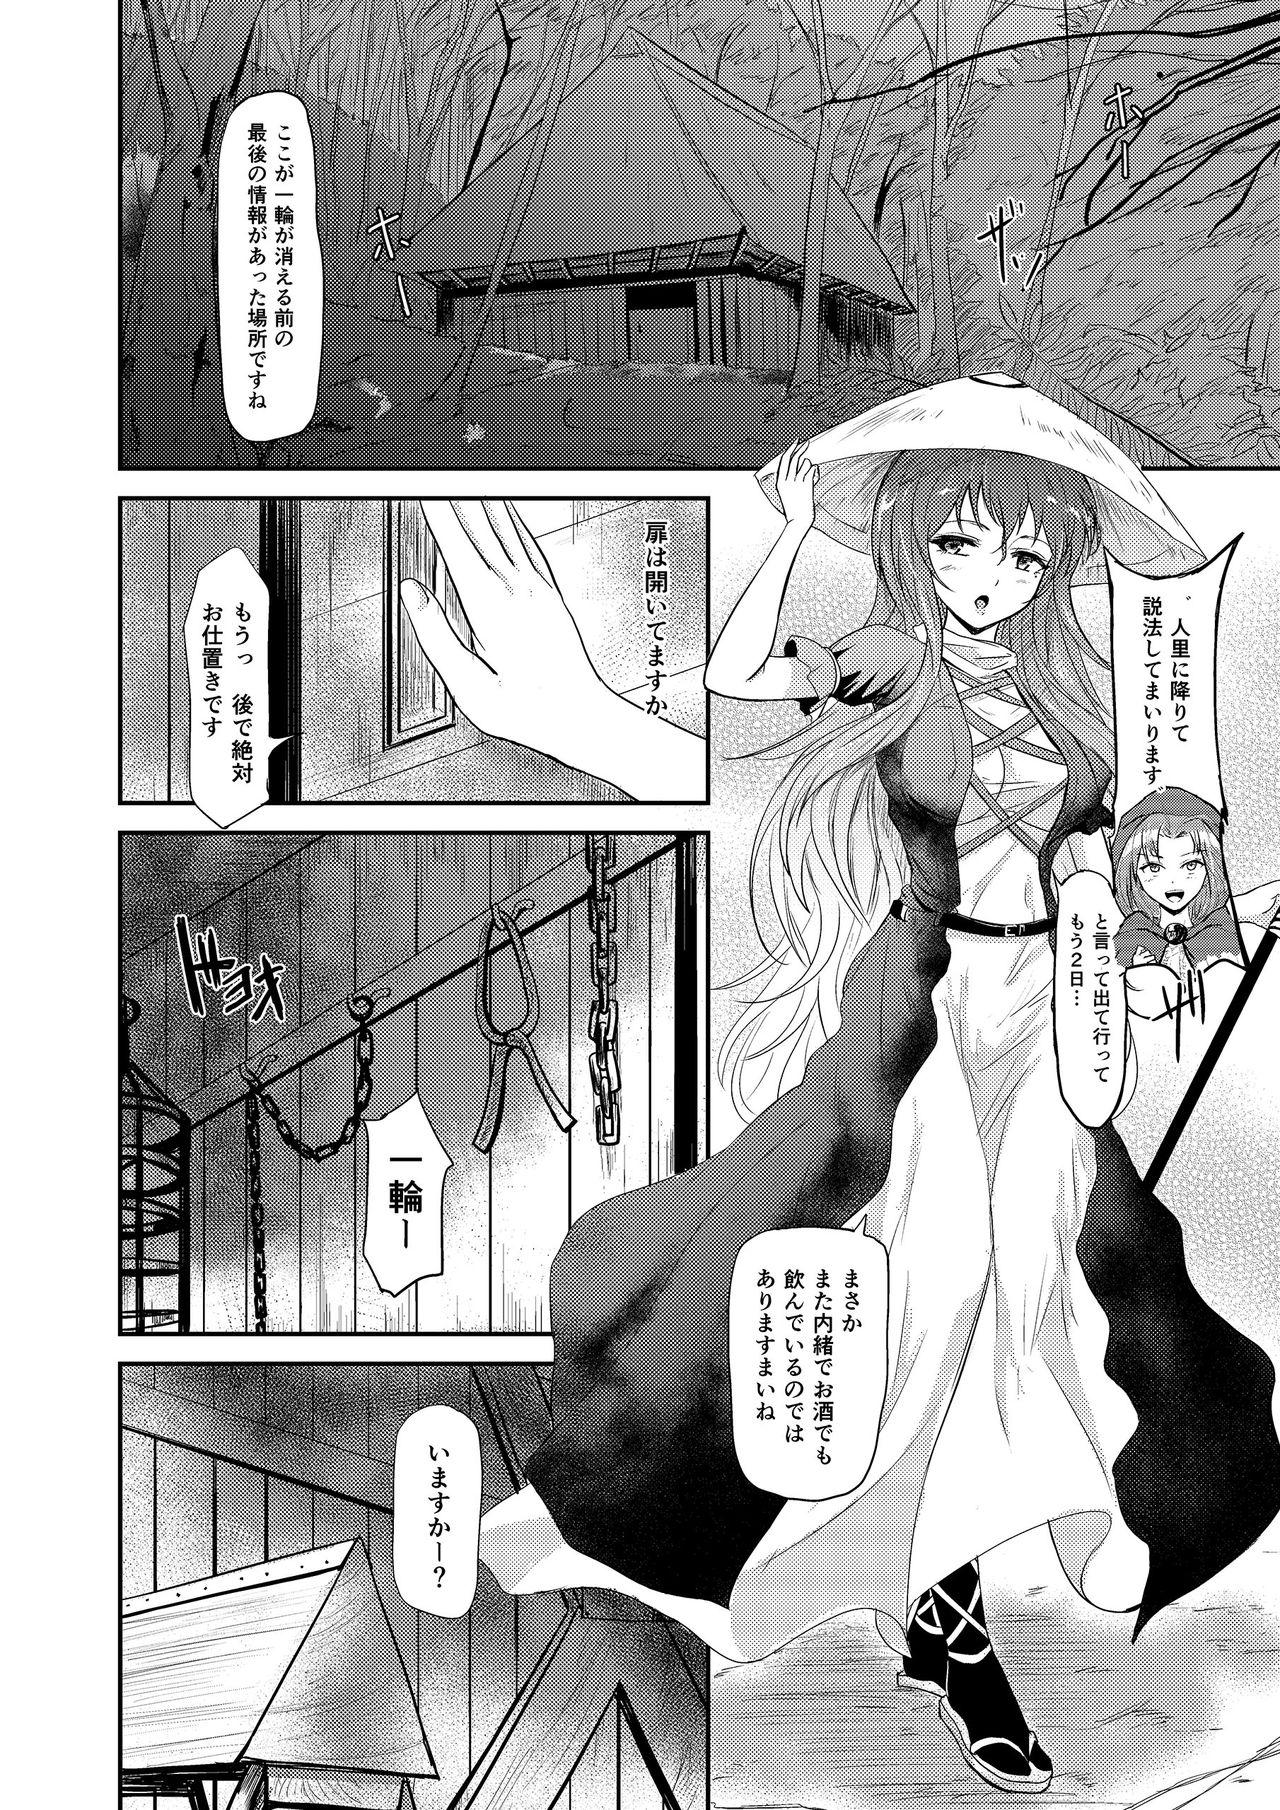 Perfect Girl Porn Reincarnation - Touhou project 8teen - Page 4